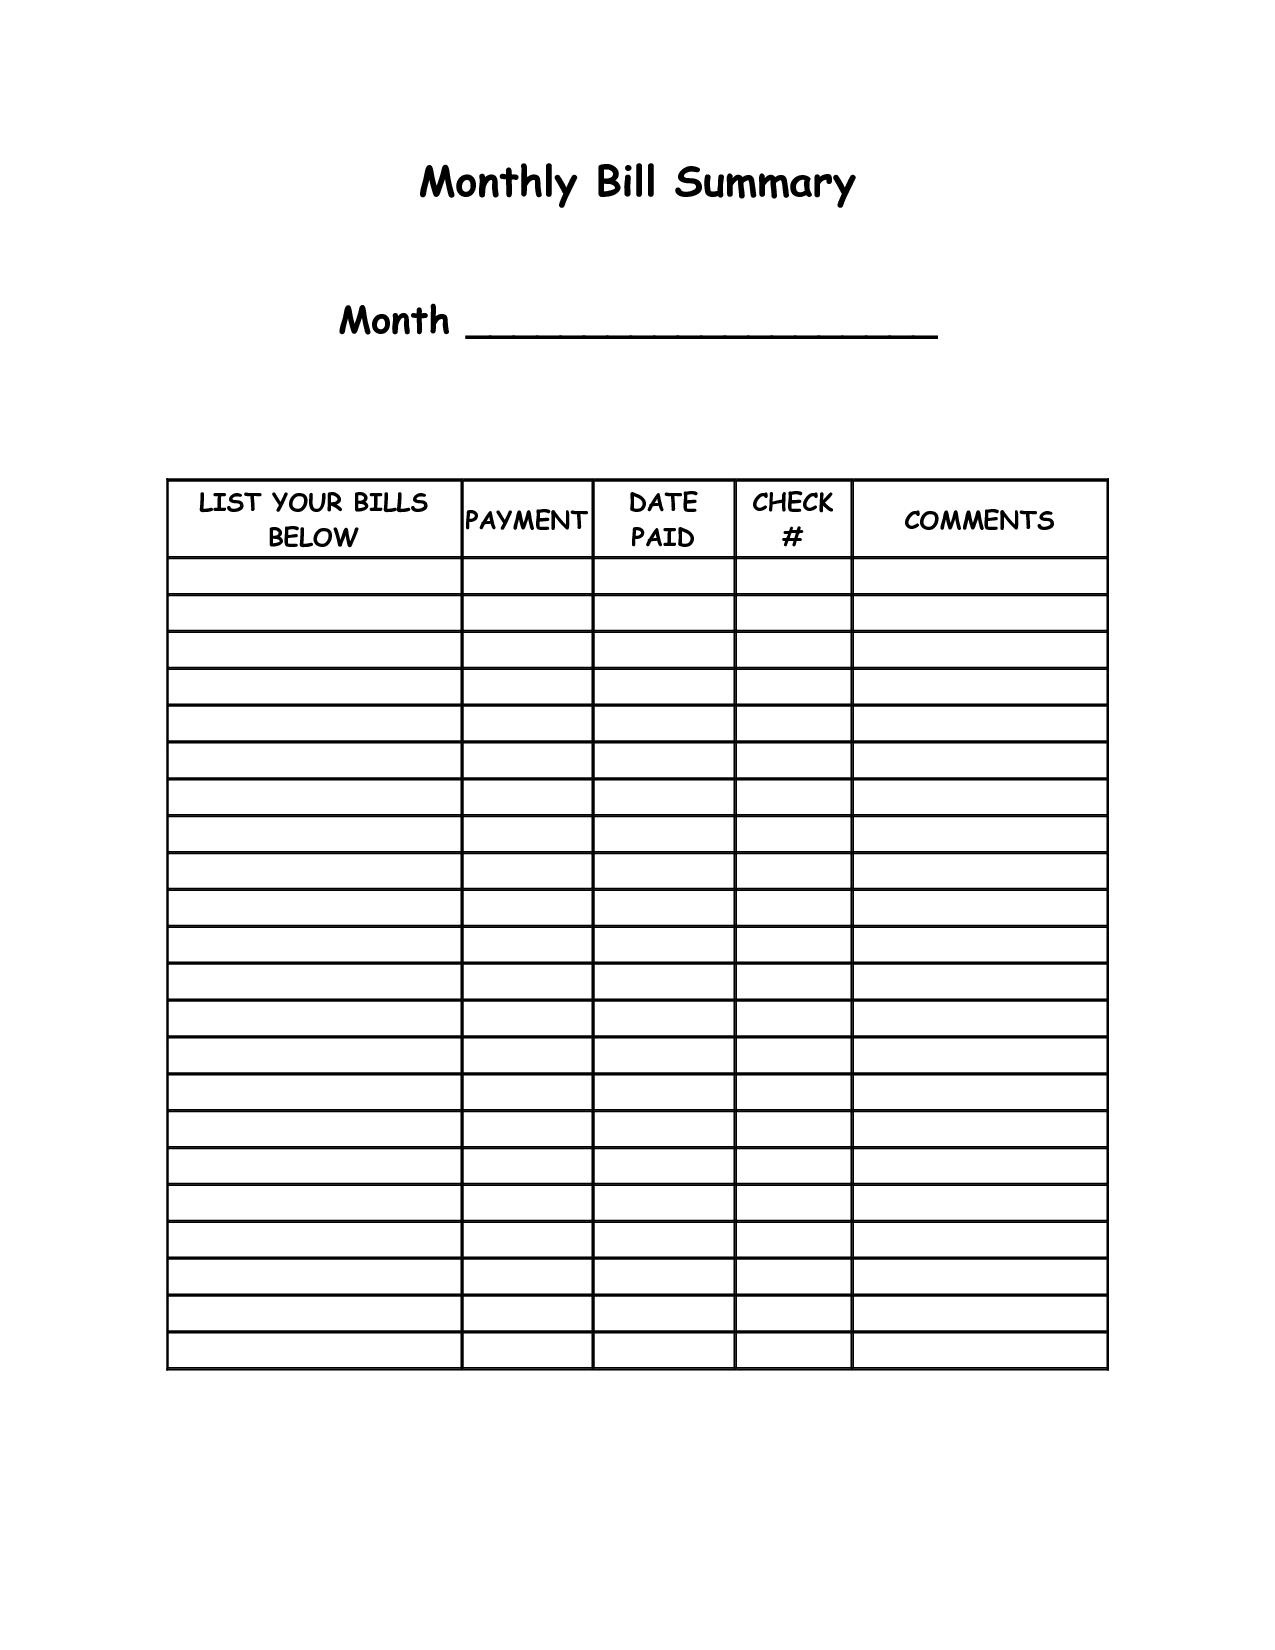 Monthly Bill Summary Doc | Organization | Bill Payment Organization within Templates Free To Pay Bills